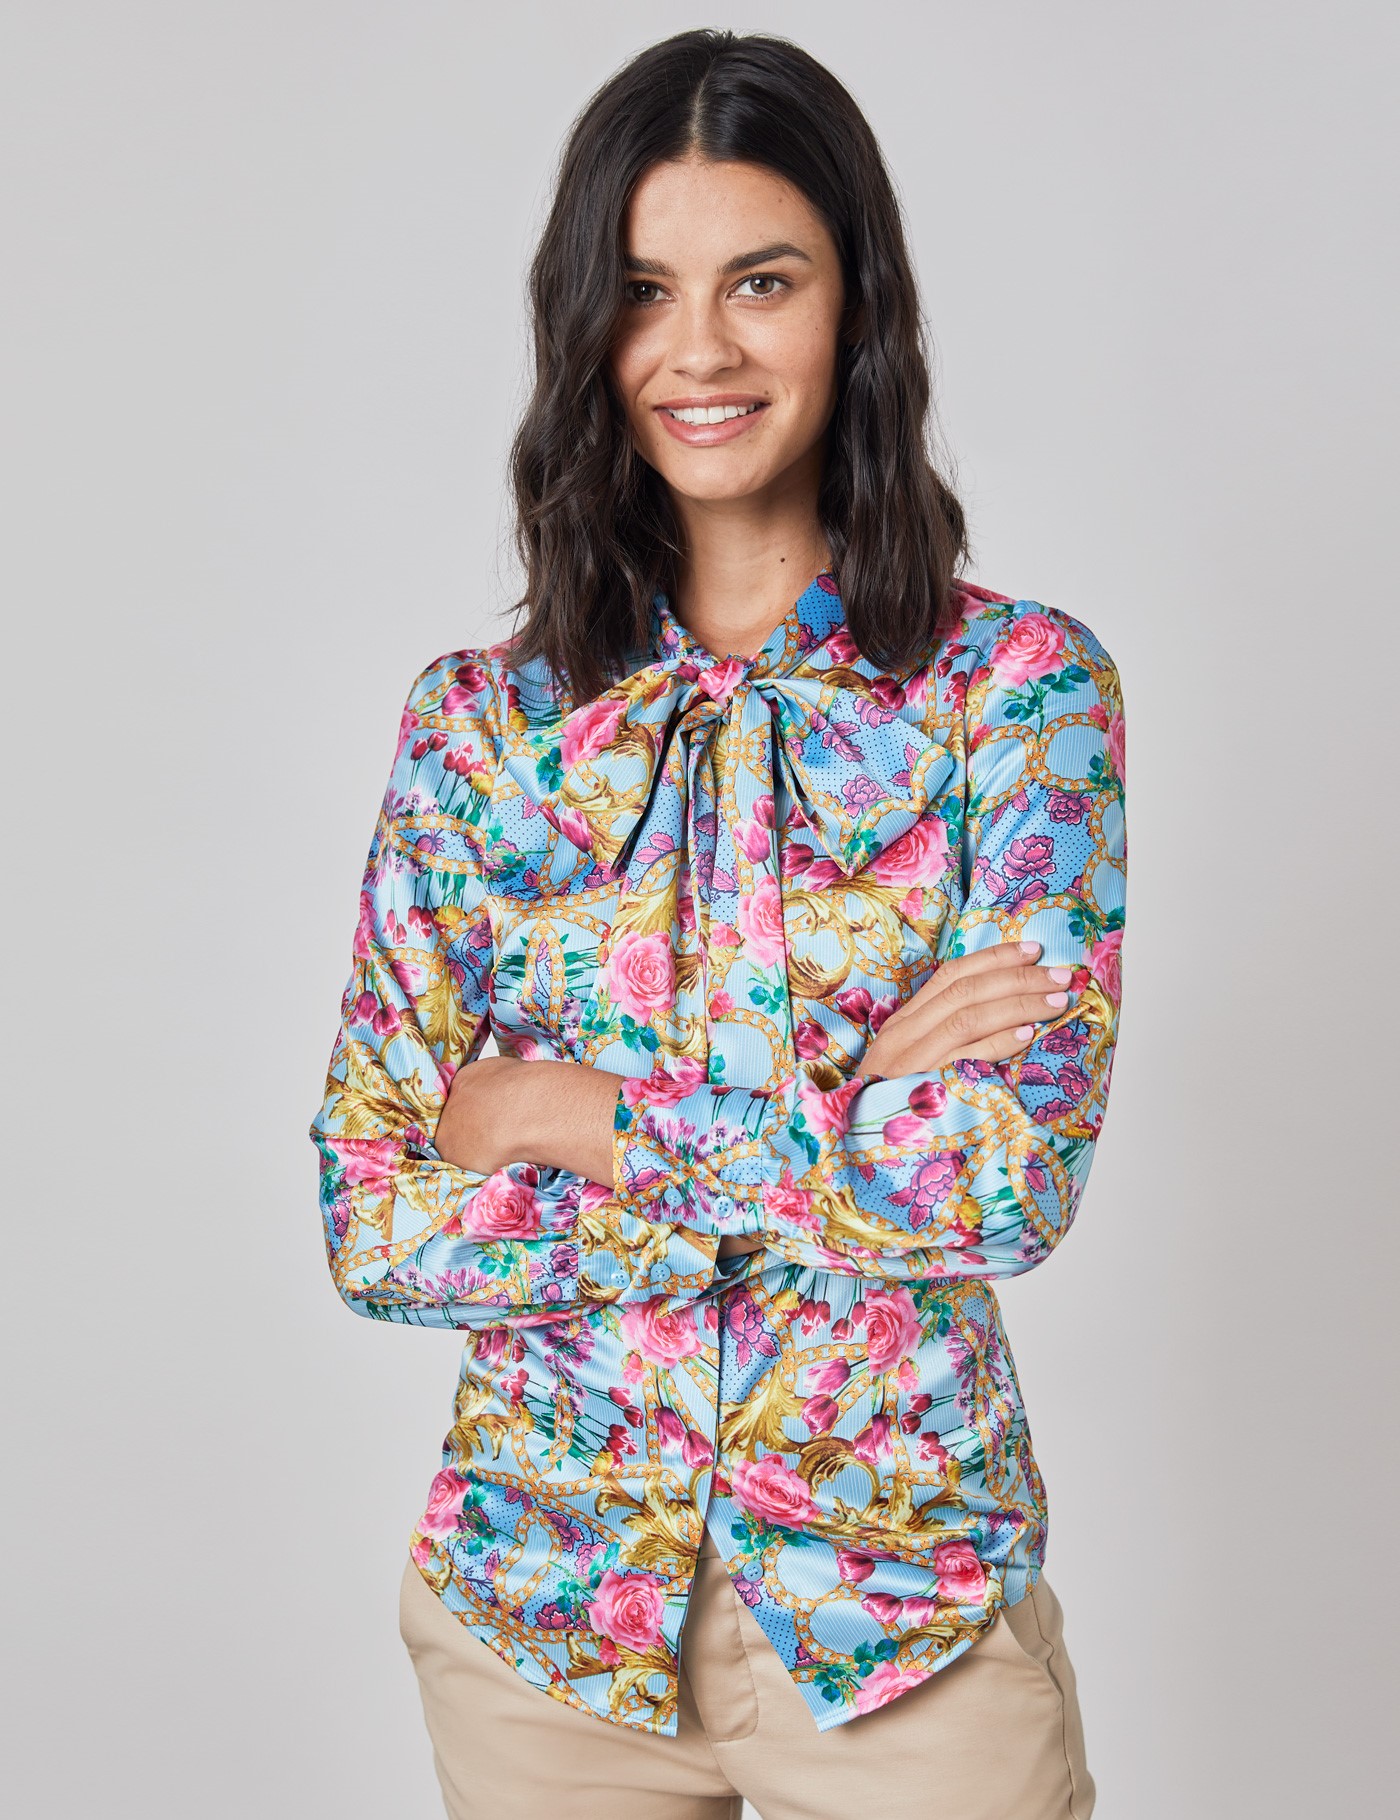 Floral Women S Satin Blouse With Single Cuff In Blue And Pink Hawes And Curtis Uk